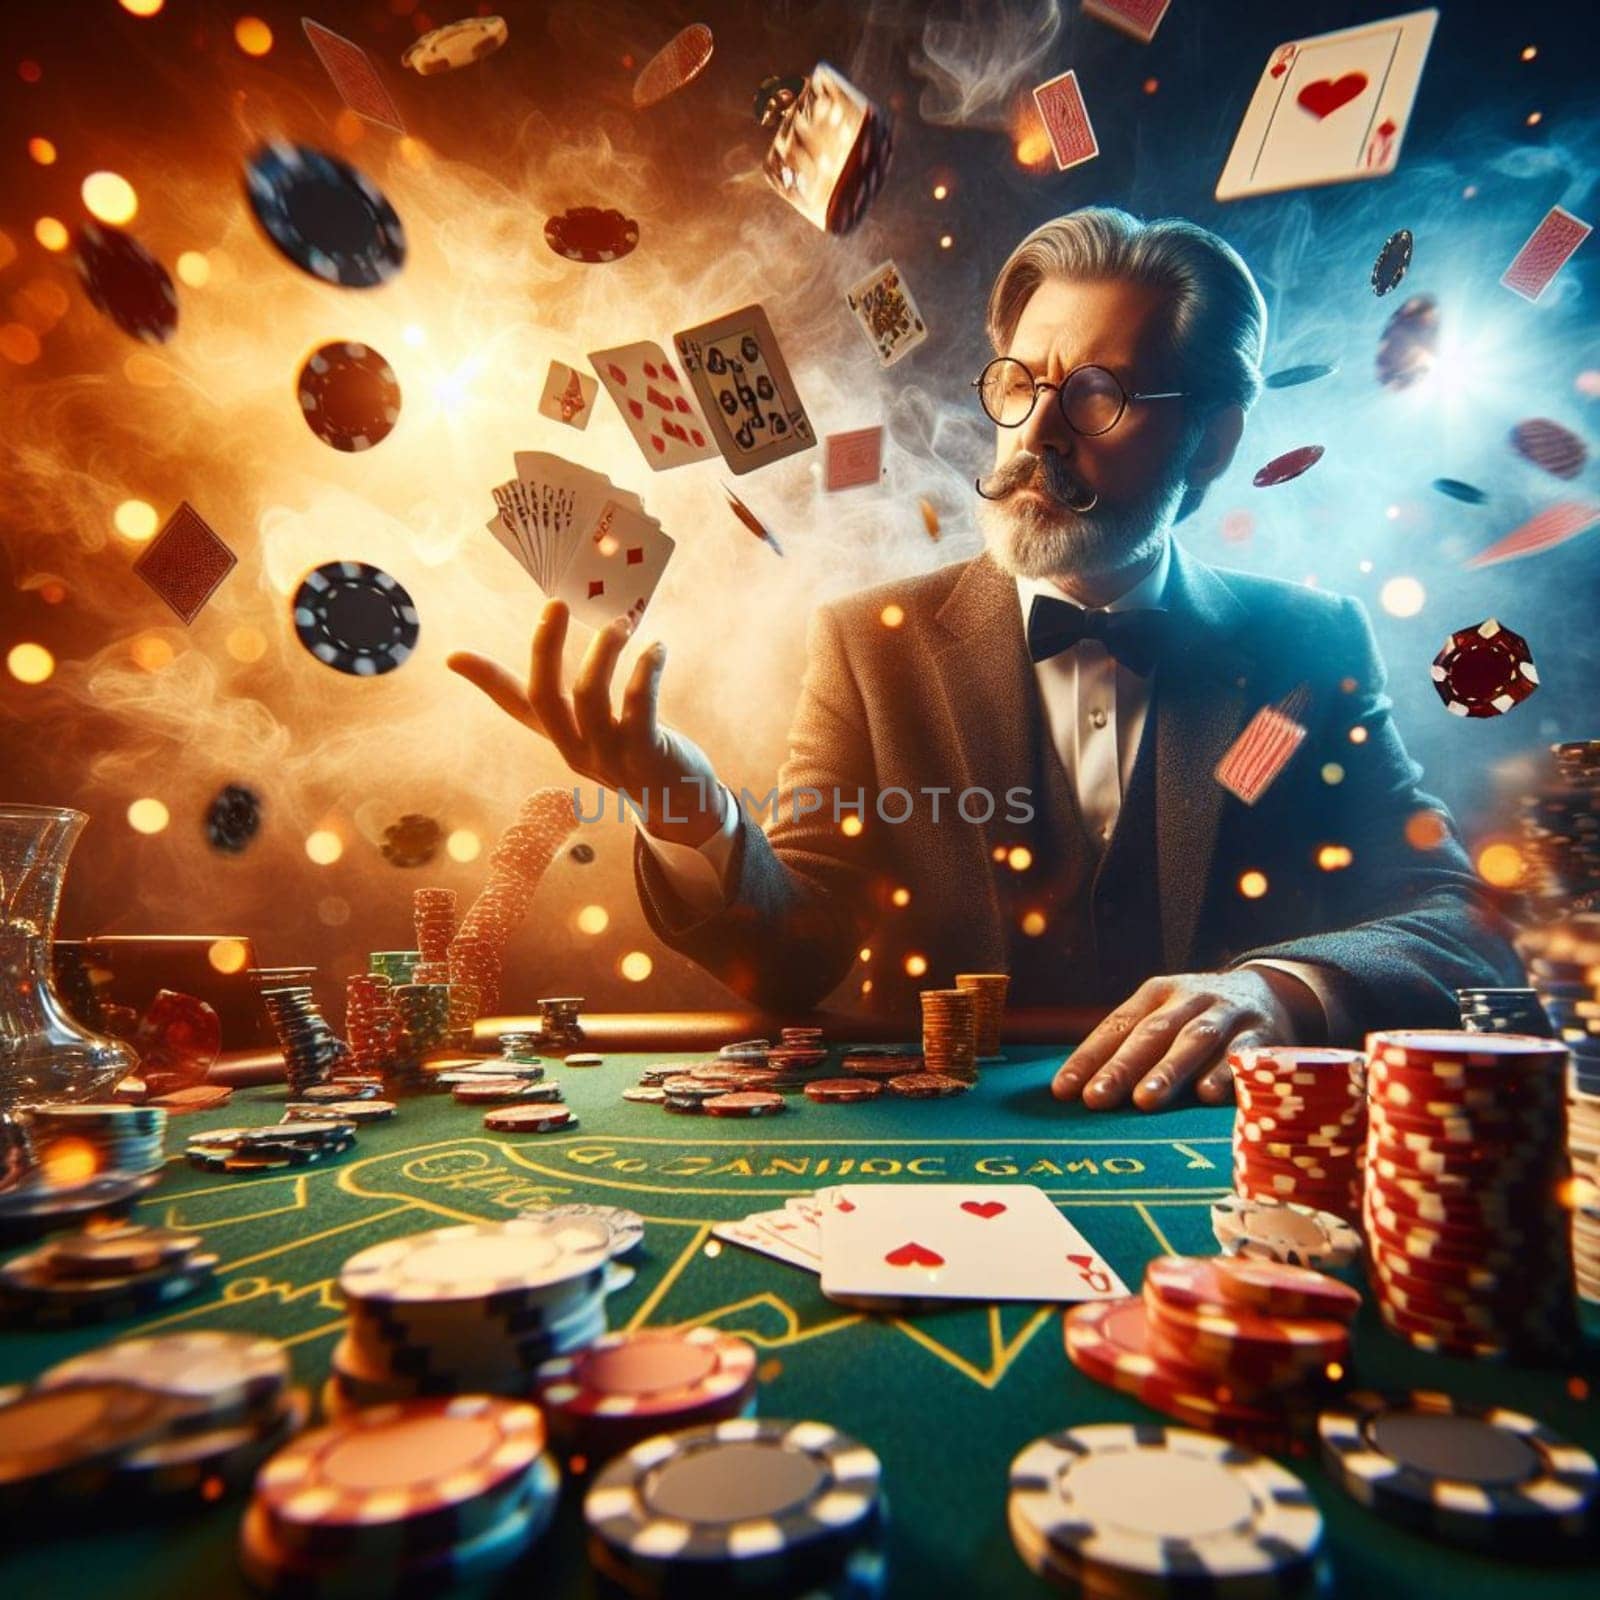 A man dressed in a formal suit is seated at a poker table, engaged in a game with other players. He is focused and calculating his next move, holding his cards close to his chest, AI generated